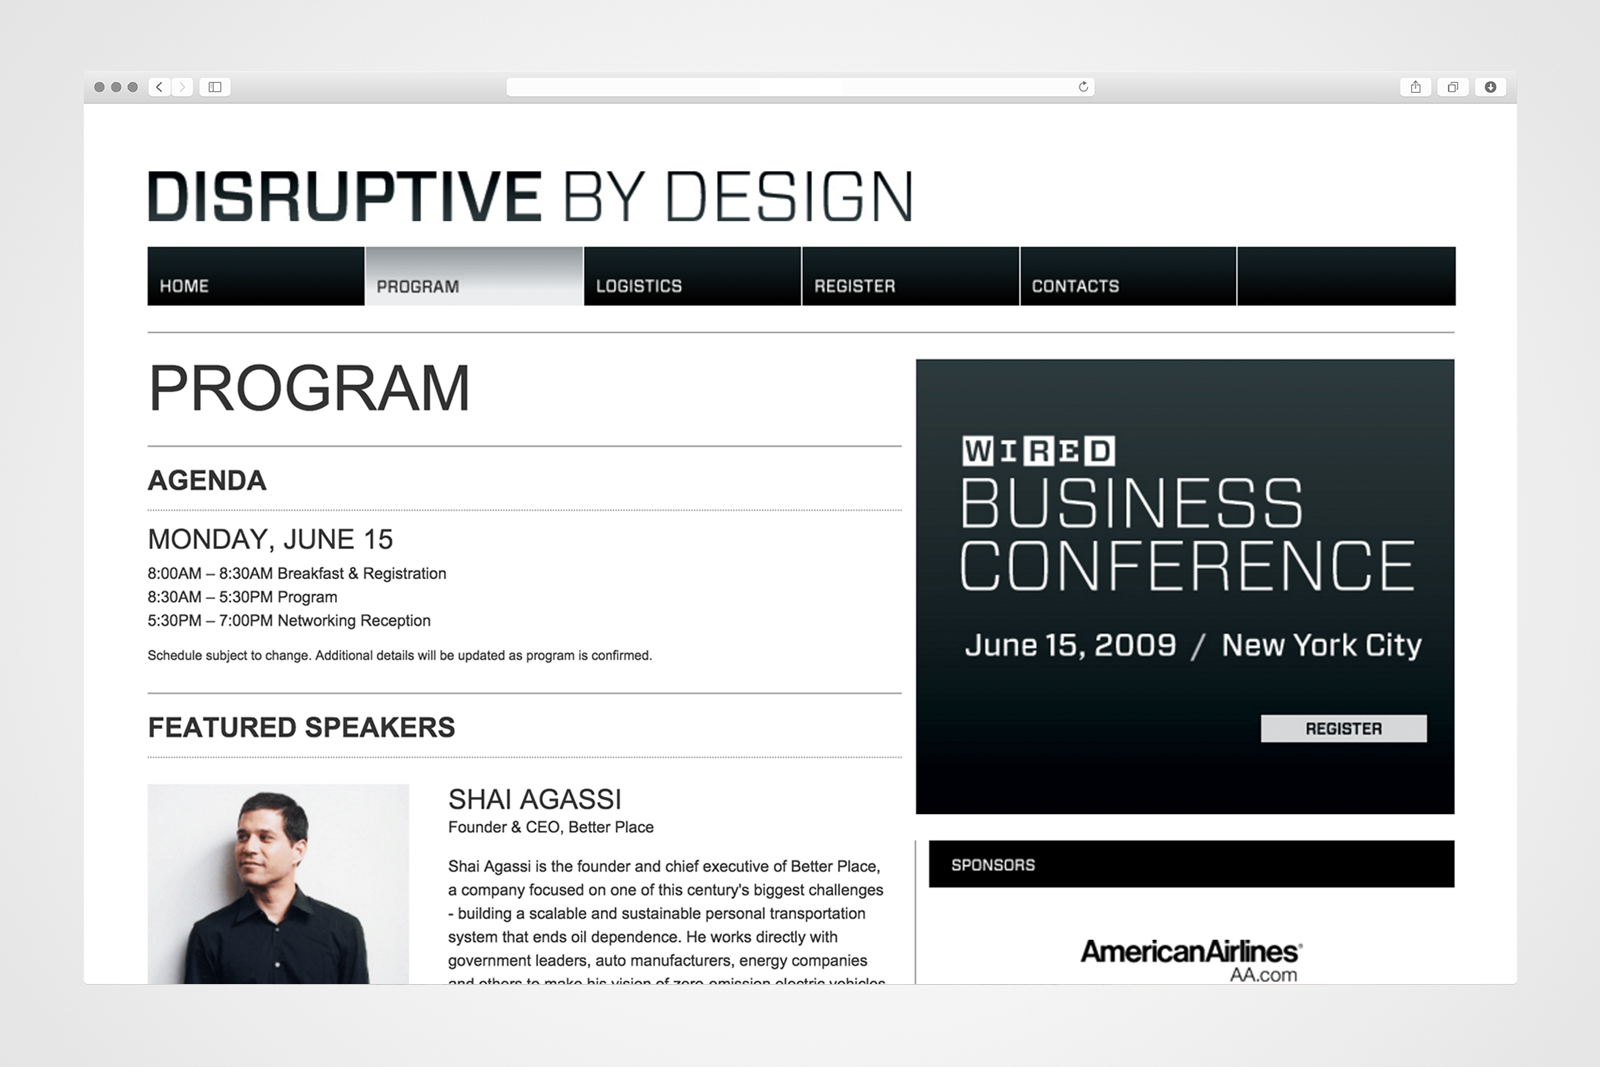 WIRED Disruptive by Design